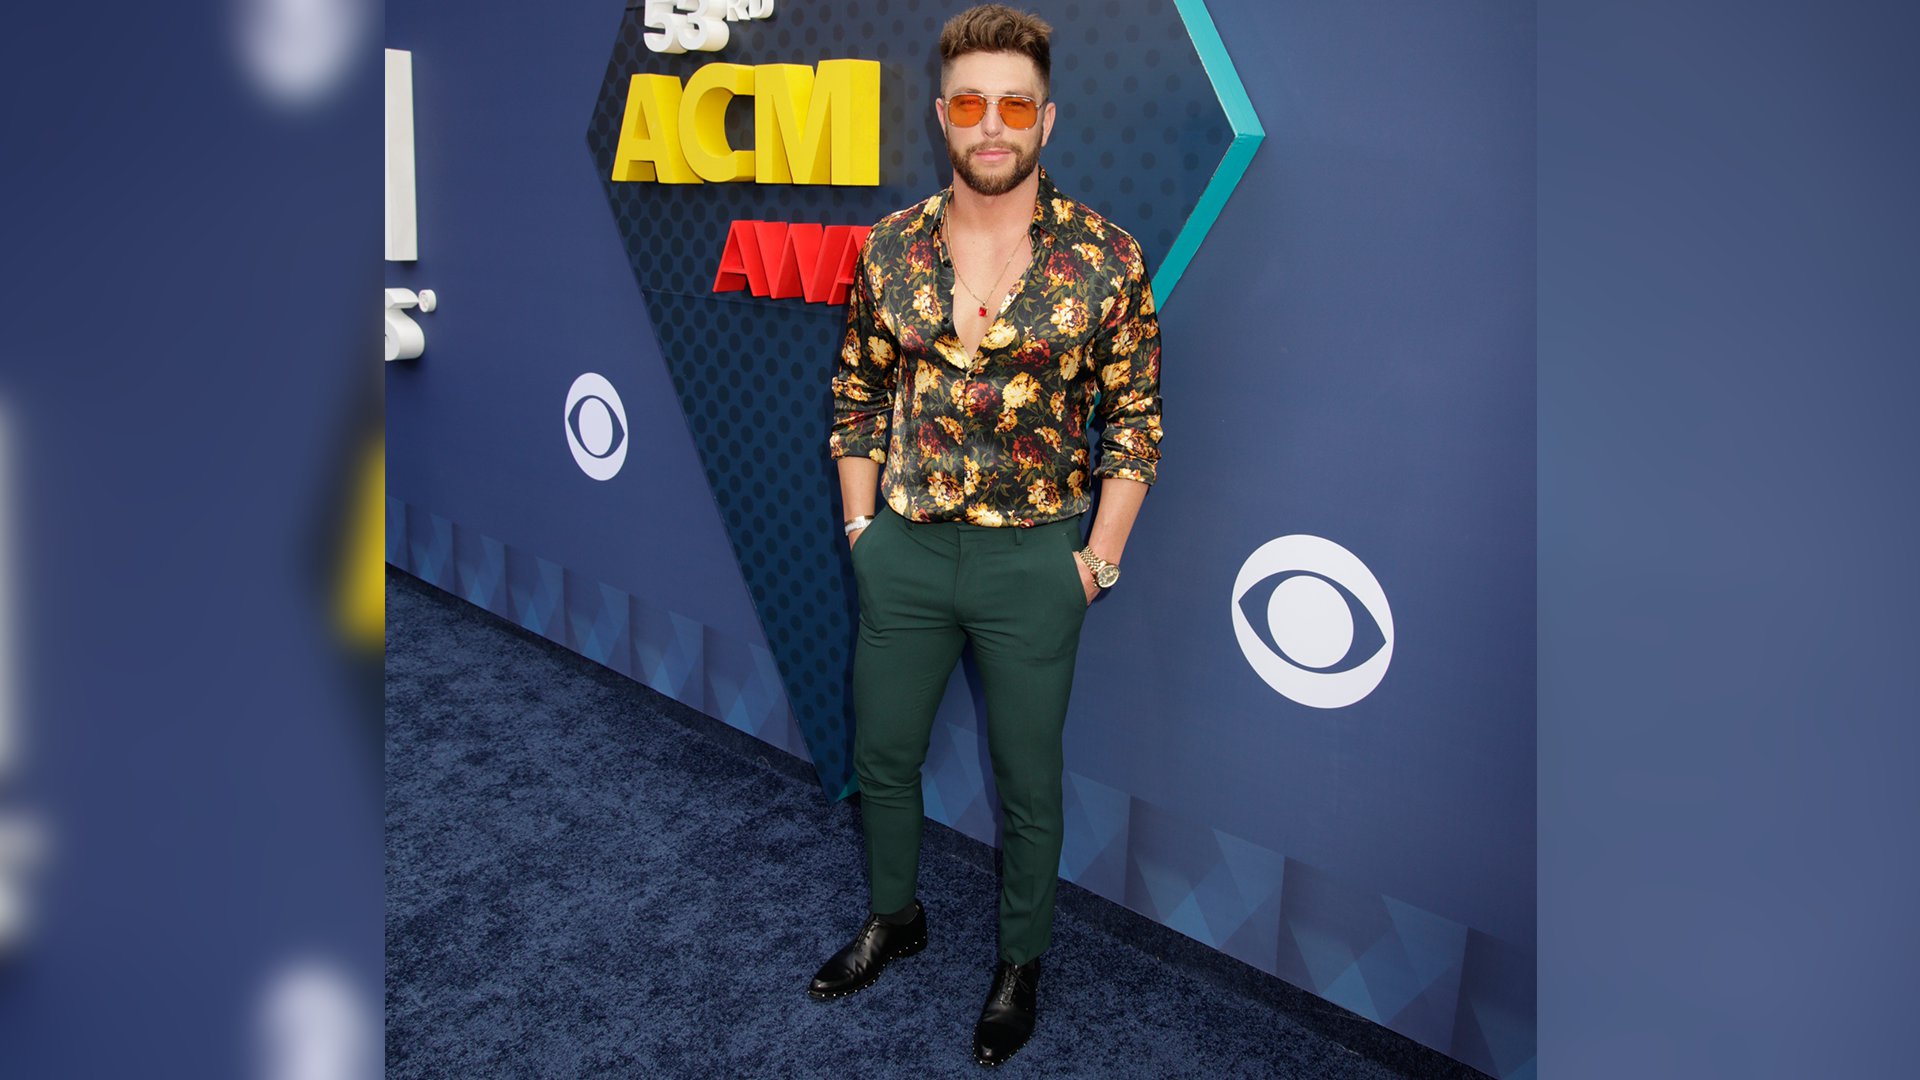 Chris Lane struts down the red carpet in a pair of emerald pants and patterned button-down shirt.